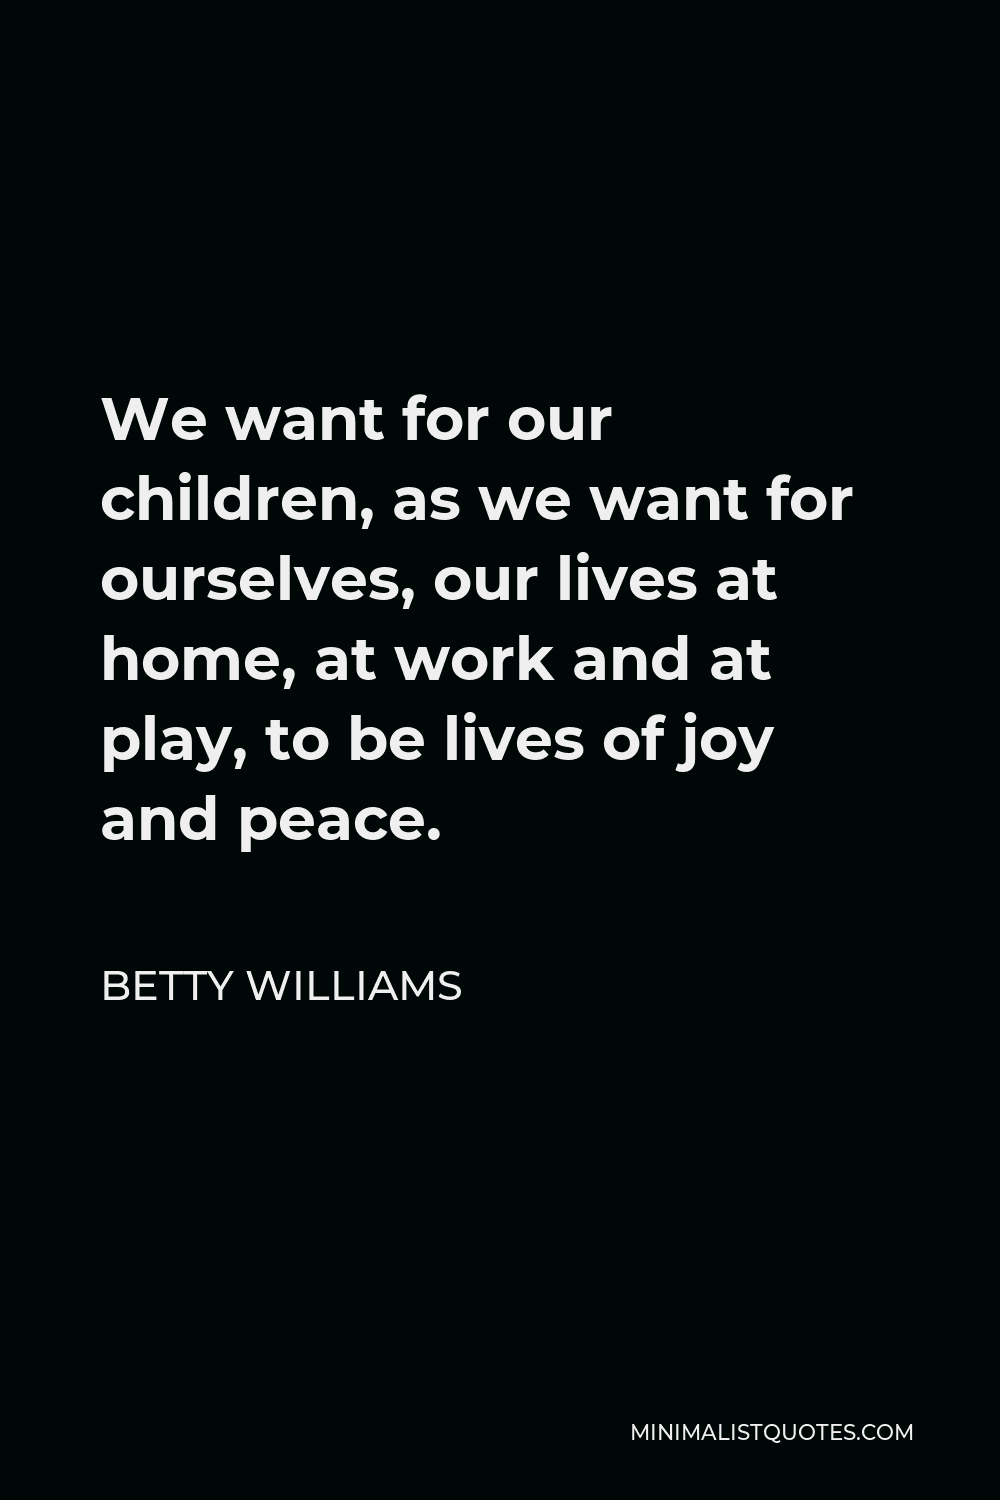 Betty Williams Quote - We want for our children, as we want for ourselves, our lives at home, at work and at play, to be lives of joy and peace.